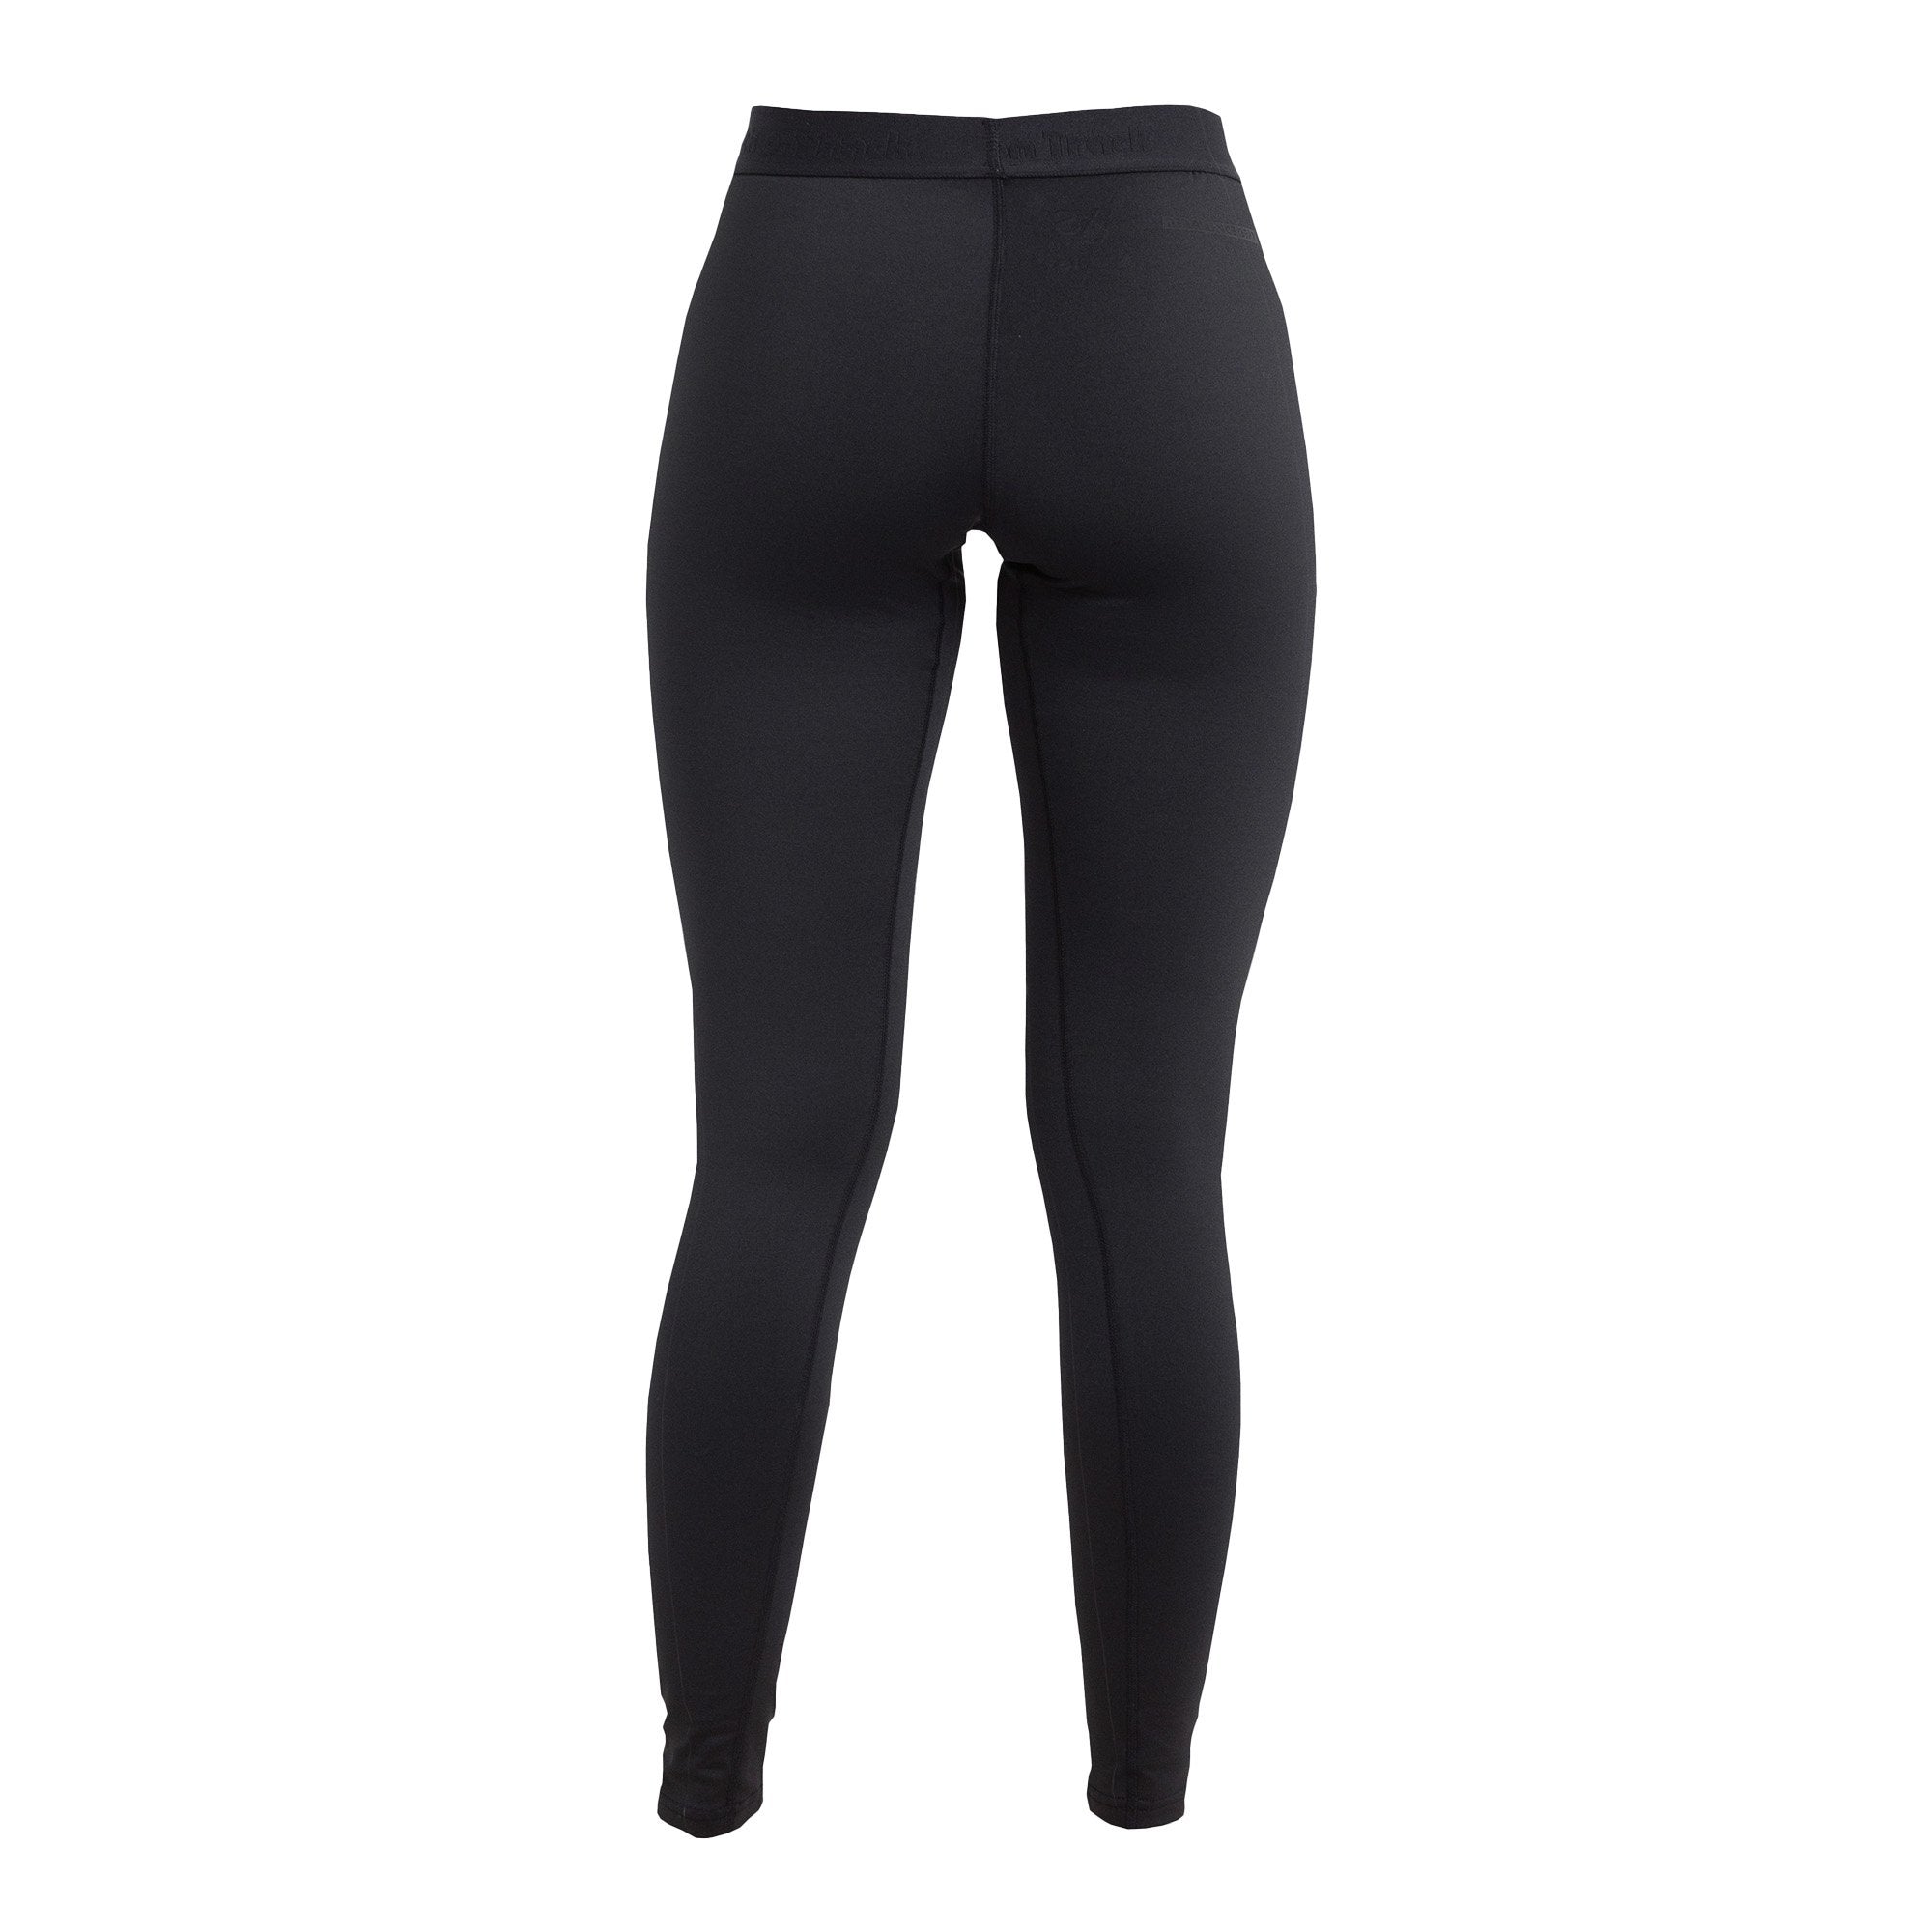 P4G Woman Cate Tights - Back on Track Sverige (5300140408987)